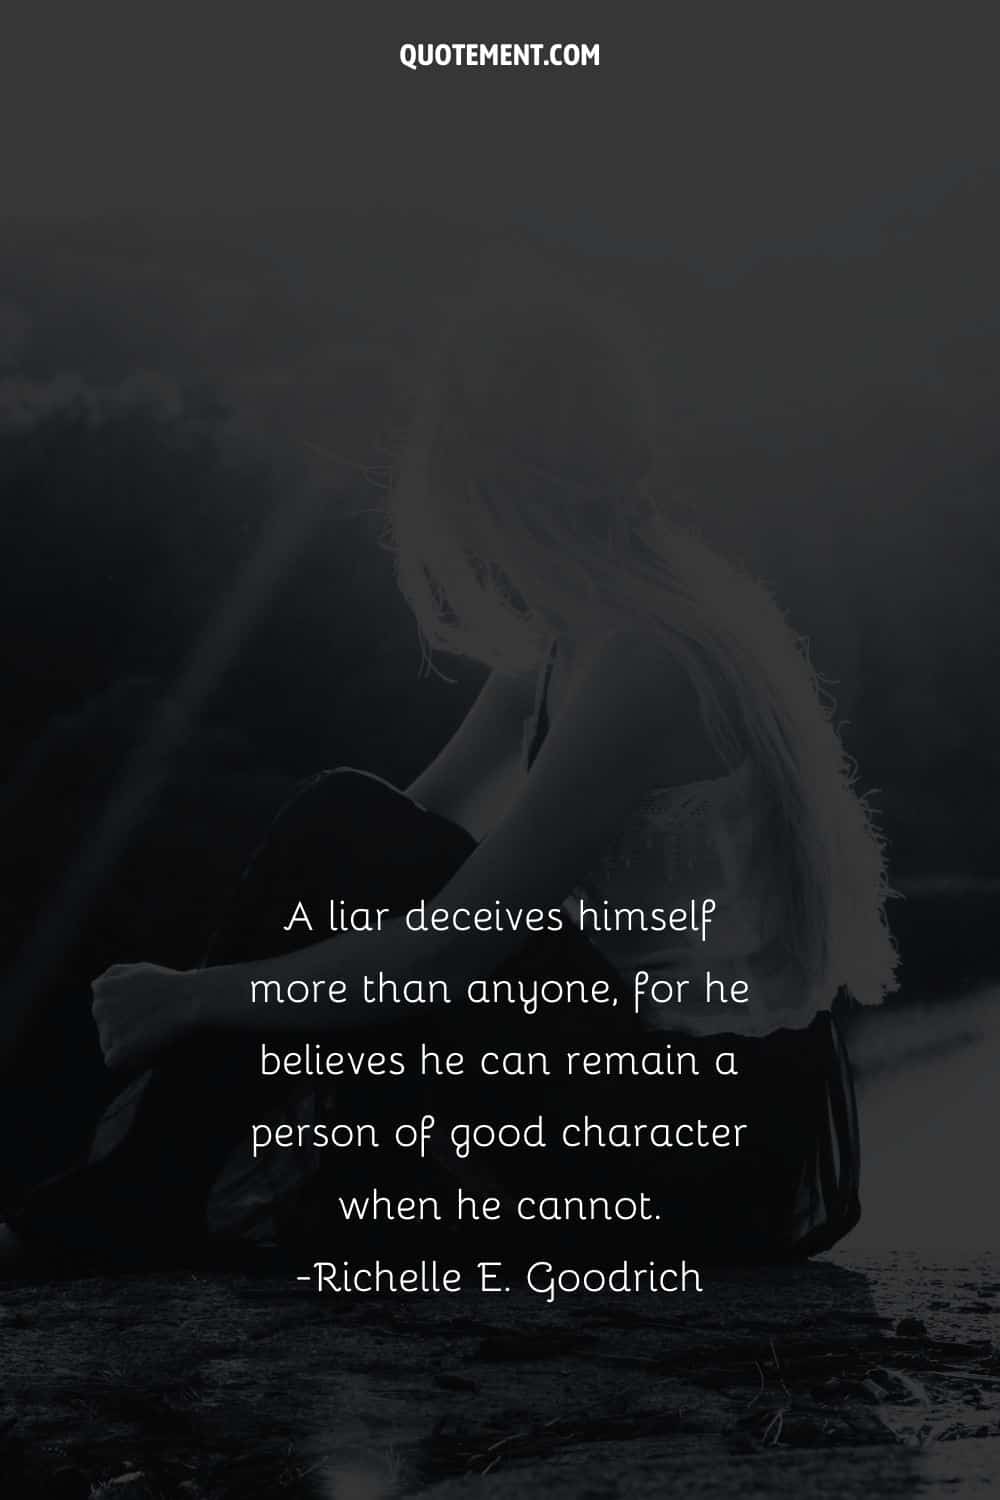 A liar deceives himself more than anyone, for he believes he can remain a person of good character when he cannot.